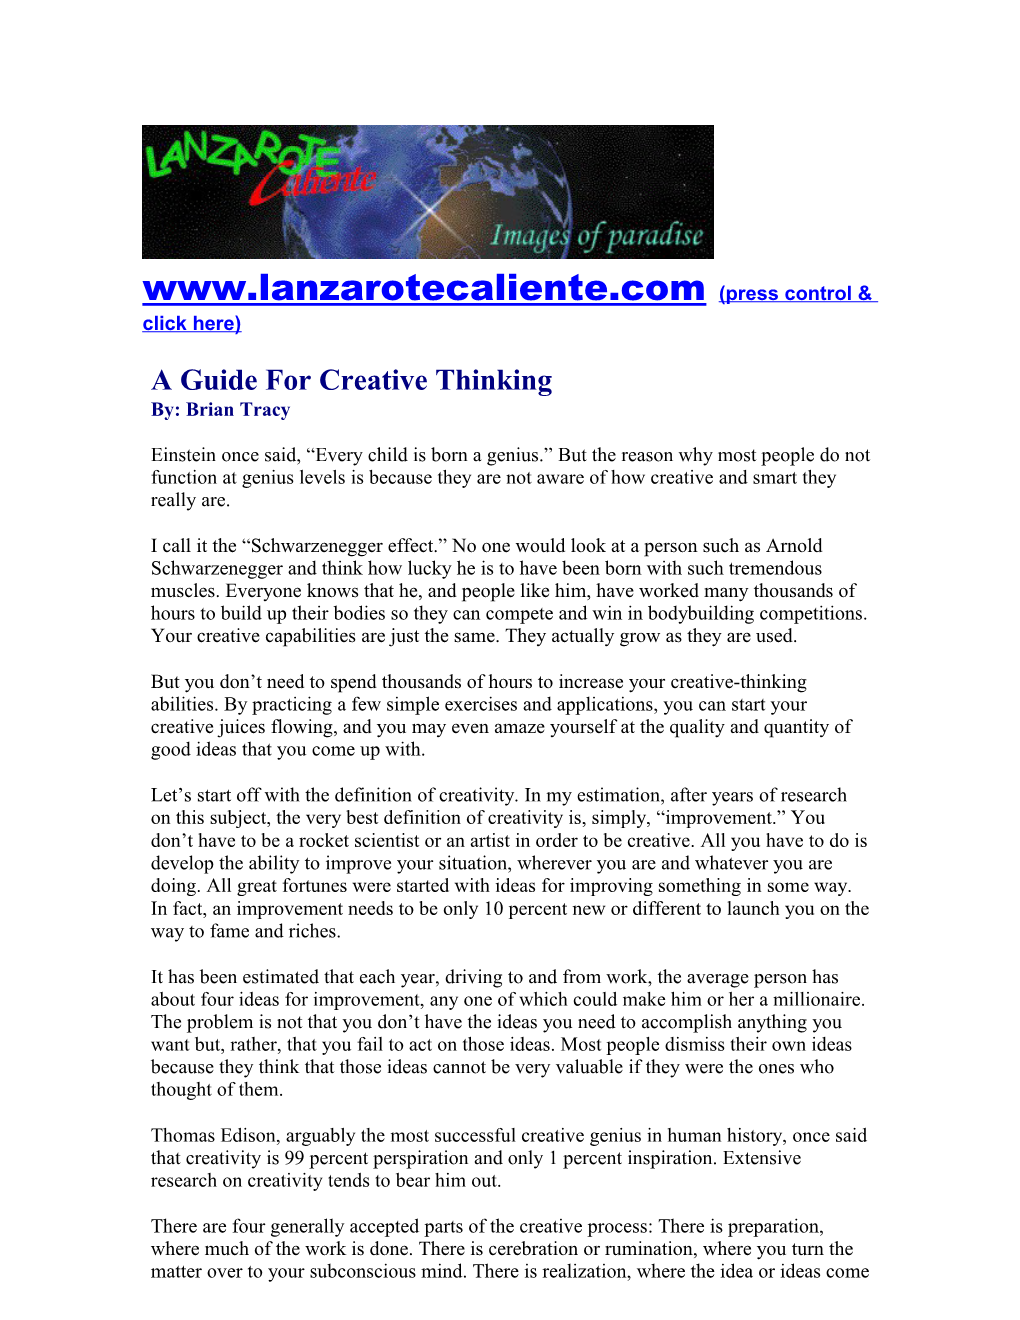 A Guide for Creative Thinking